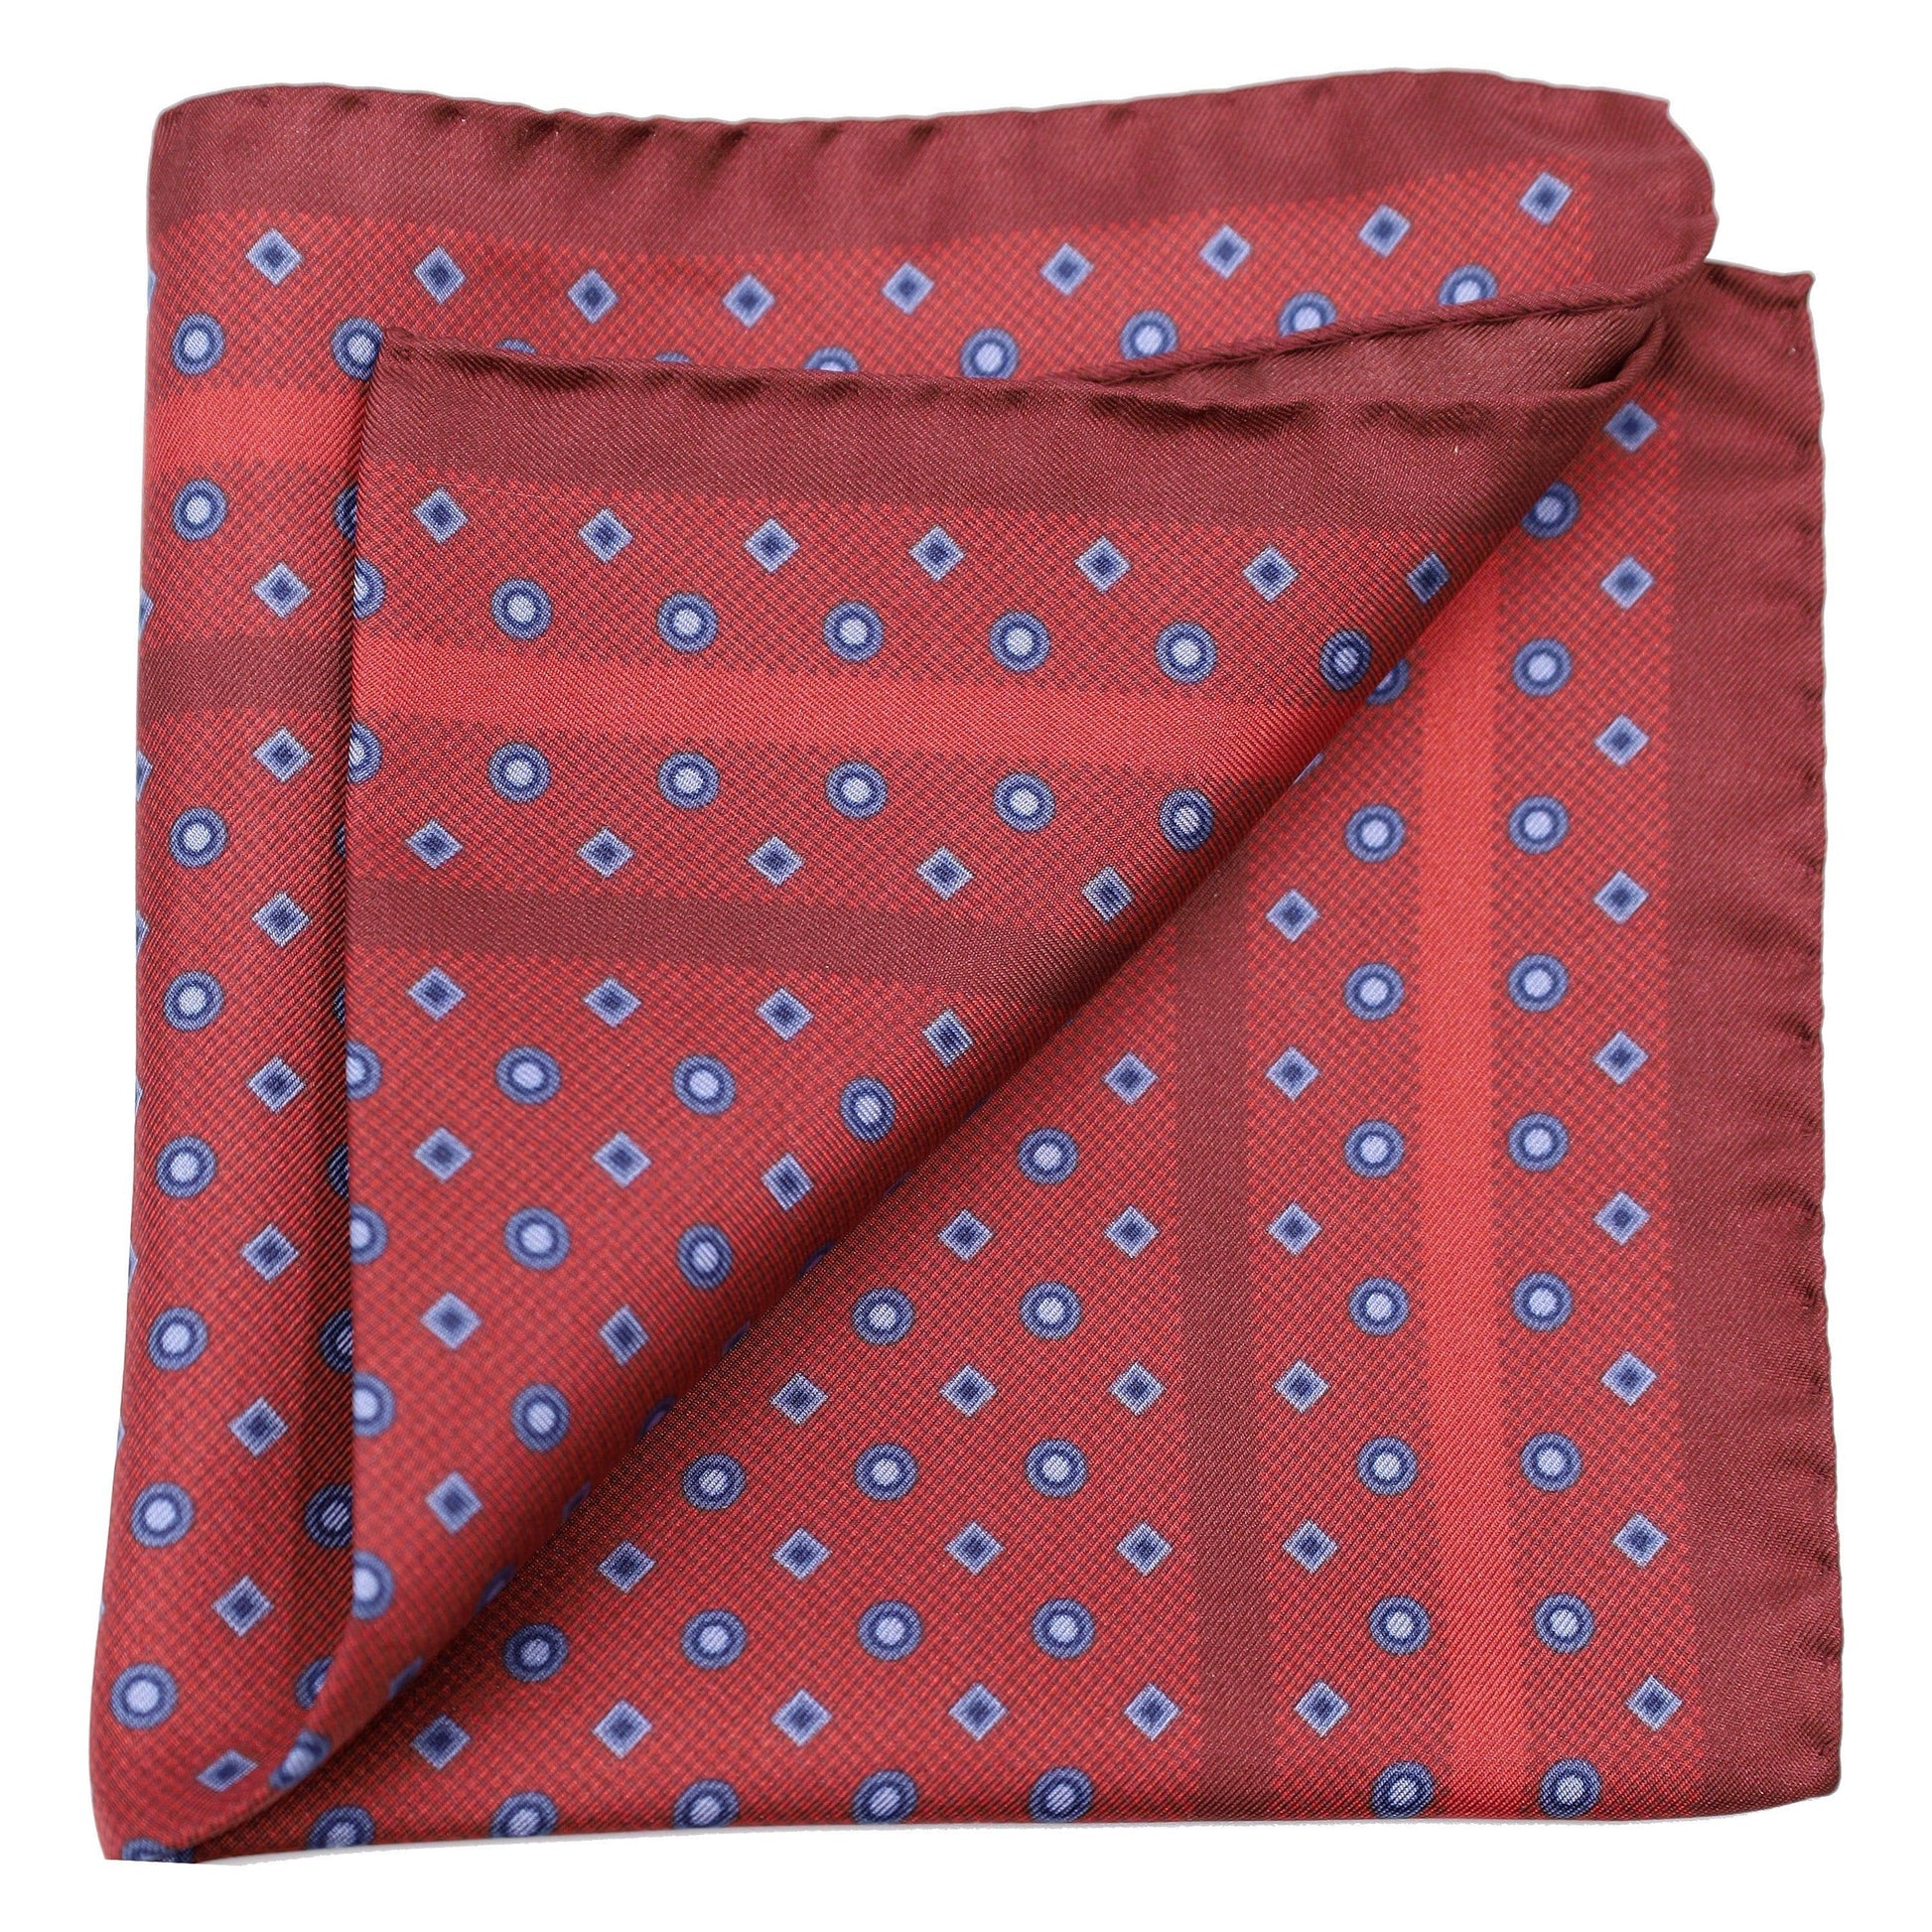 Sky Foulard on Red SIlk Pocket Square - Just White Shirts